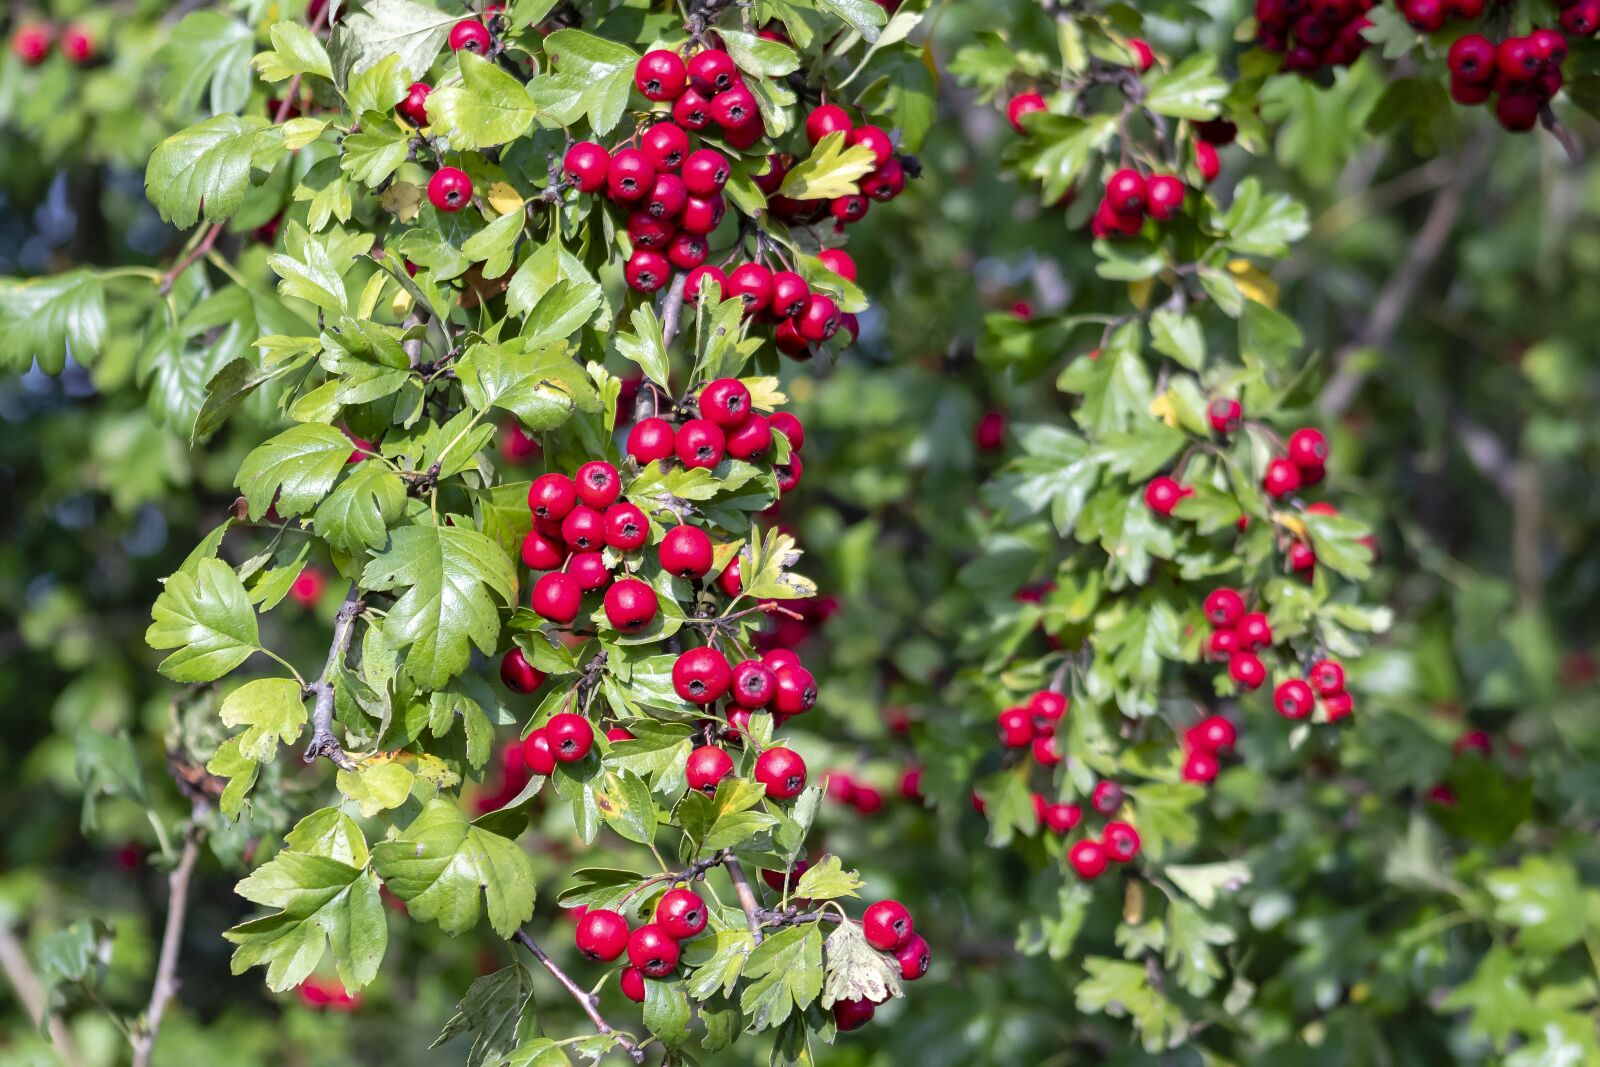 EF75-300mm f/4-5.6 sample photo. Hawthorn, berries, plant photography